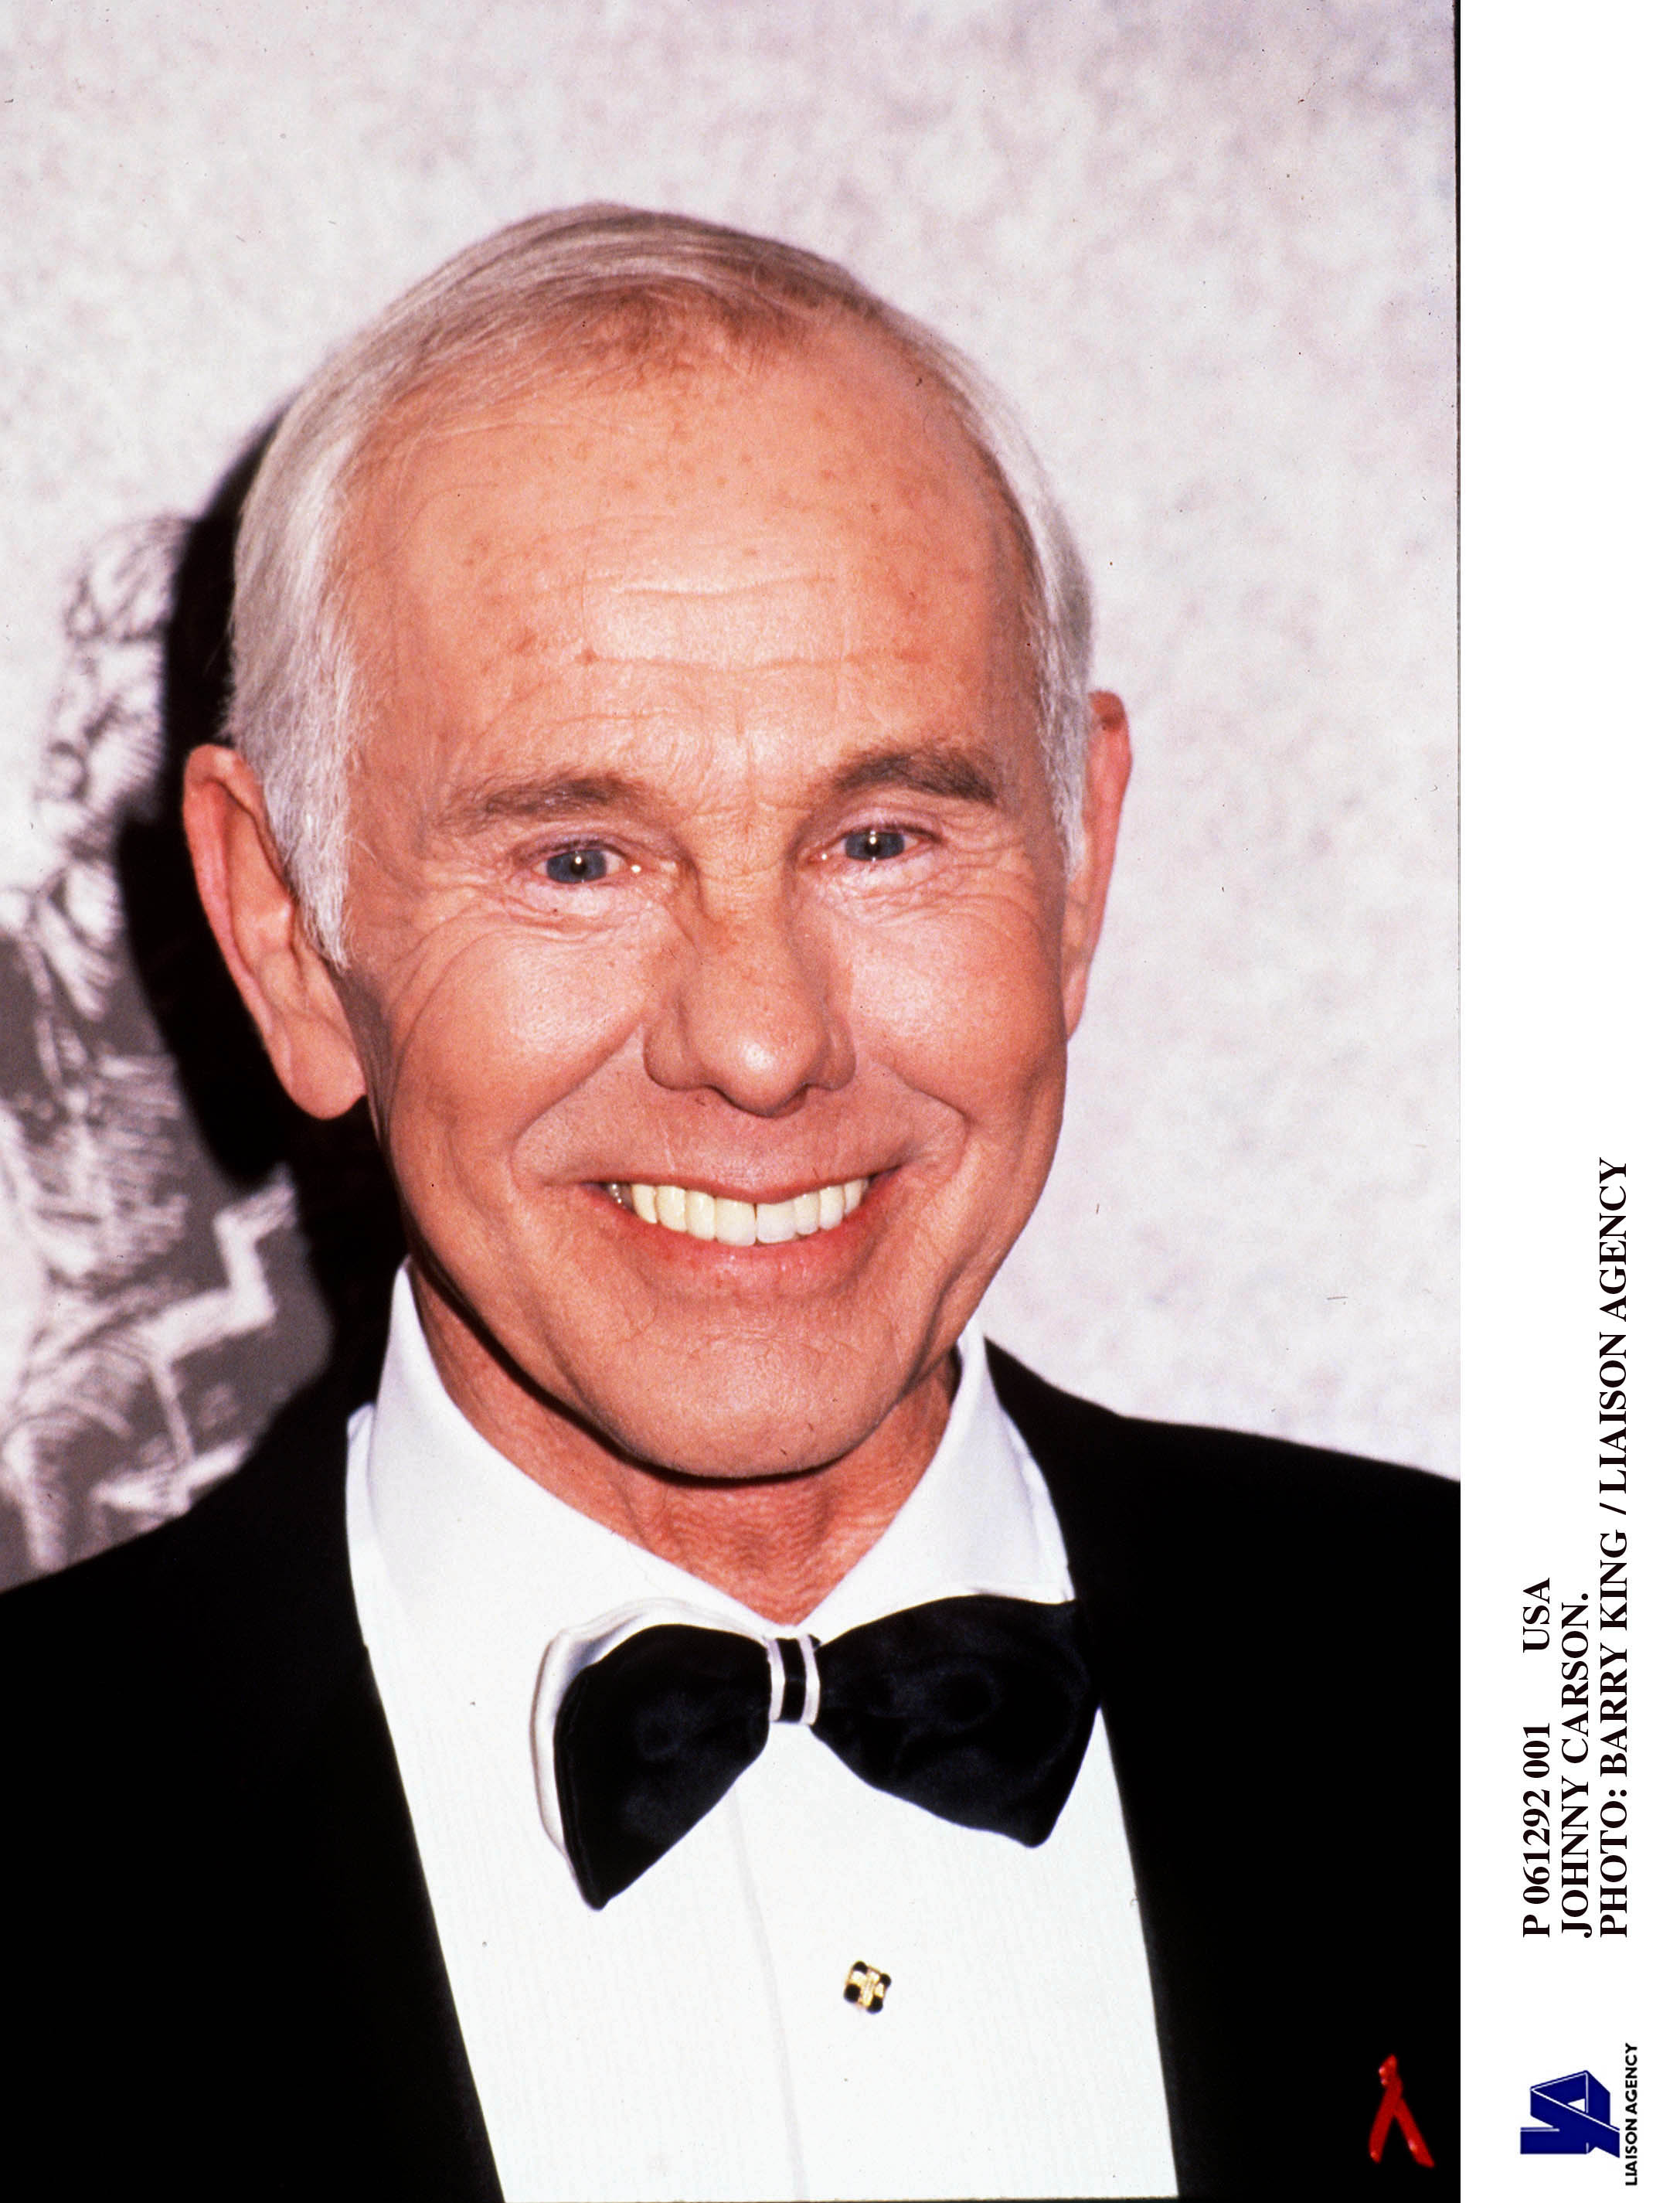 A photo of Johnny Carson. | Source: Getty Images